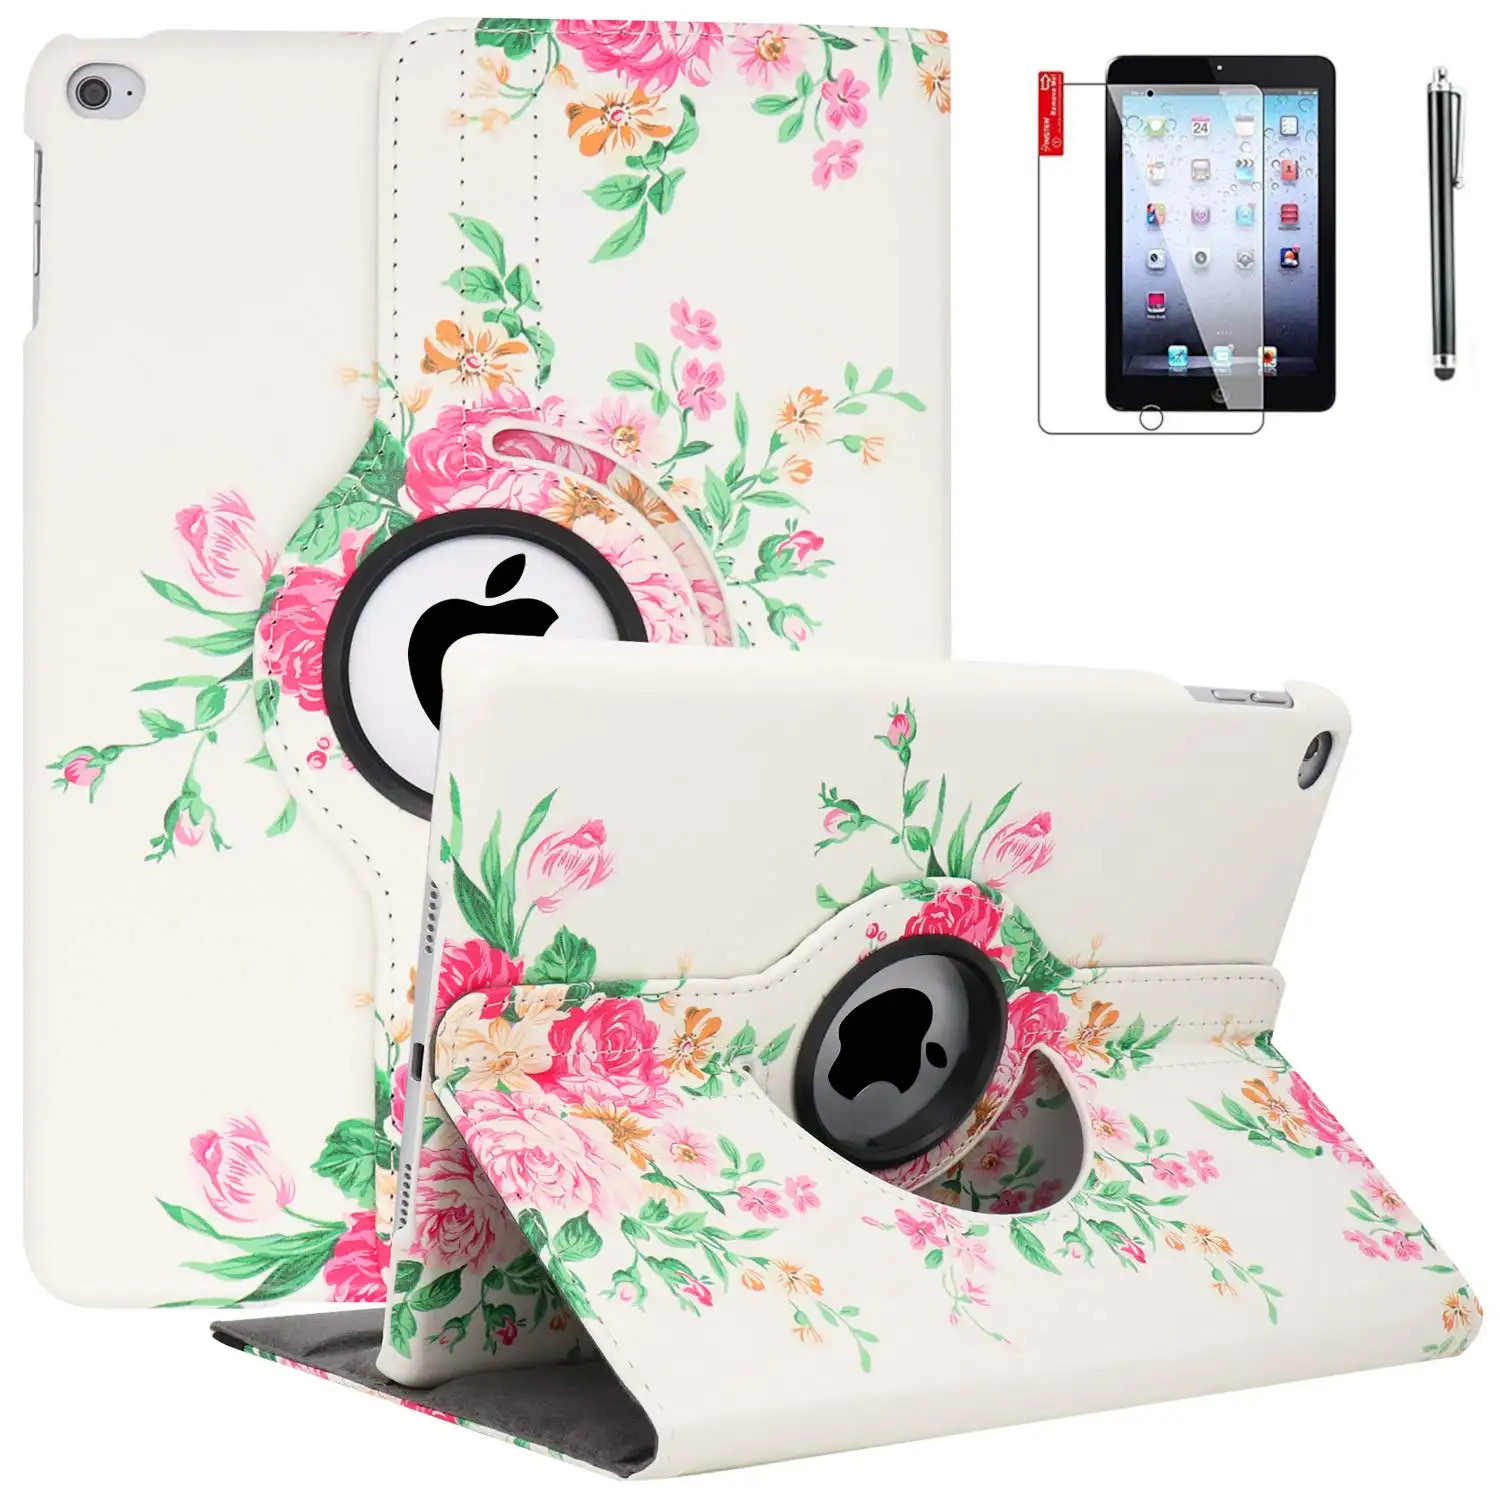 Stand Screen Protector case cover for iPad 2 3 4 case Lichee Pattern leather material Auto Sleep Wake Rotating